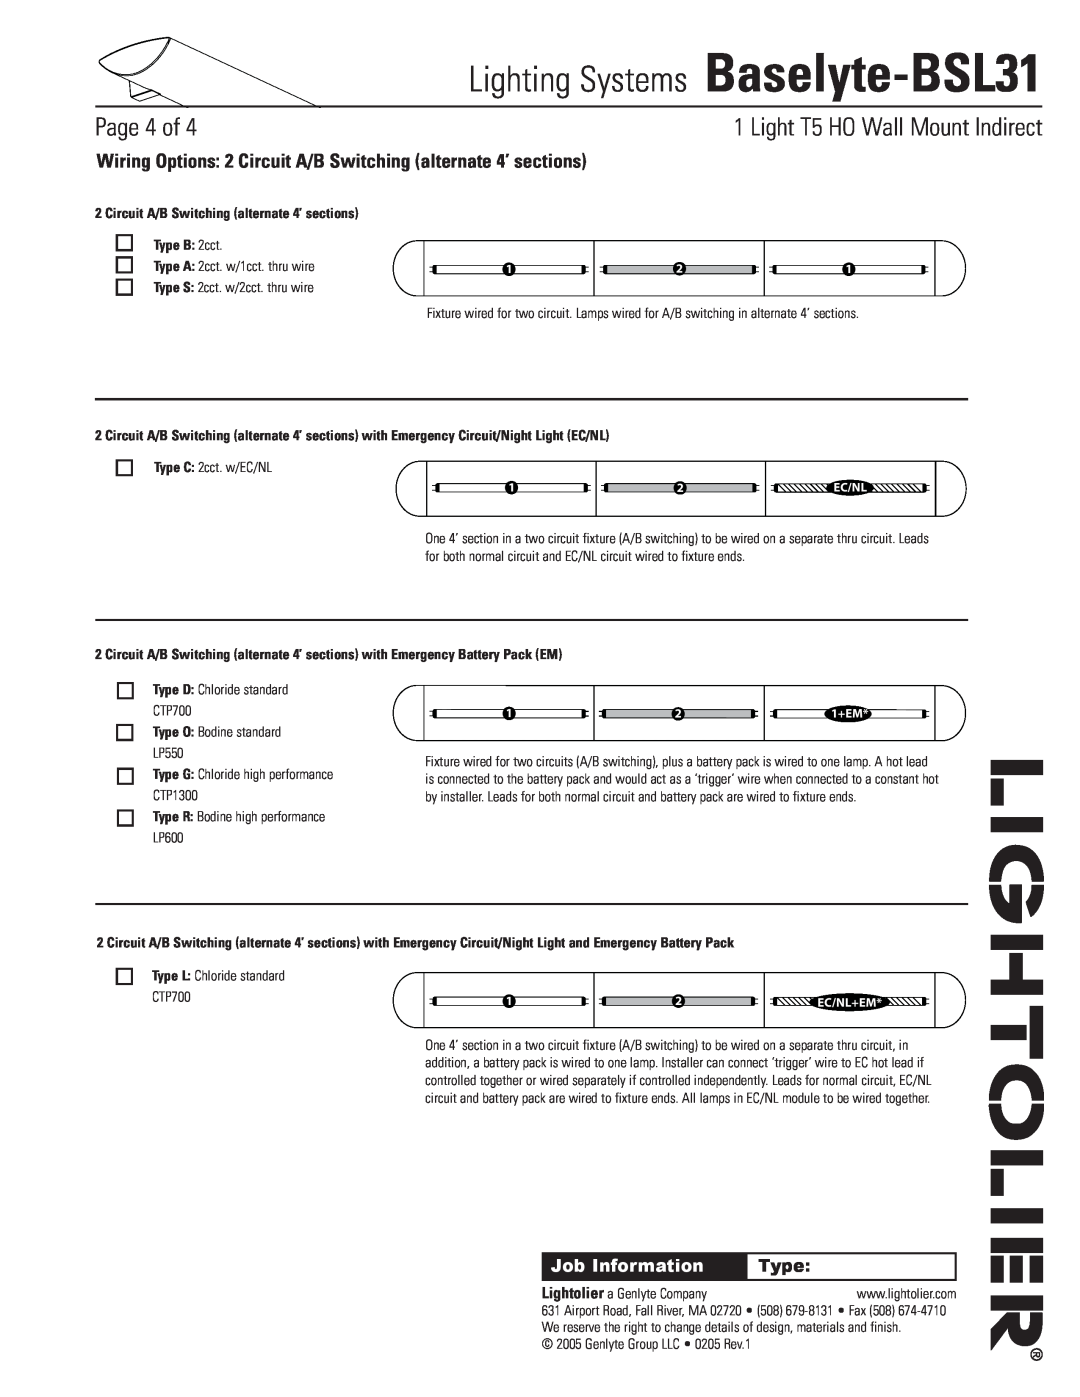 Lightolier Baselyte-BSL31 Circuit A/B Switching alternate 4’ sections, Type B 2cct, Type O Bodine standard LP550, Page of 